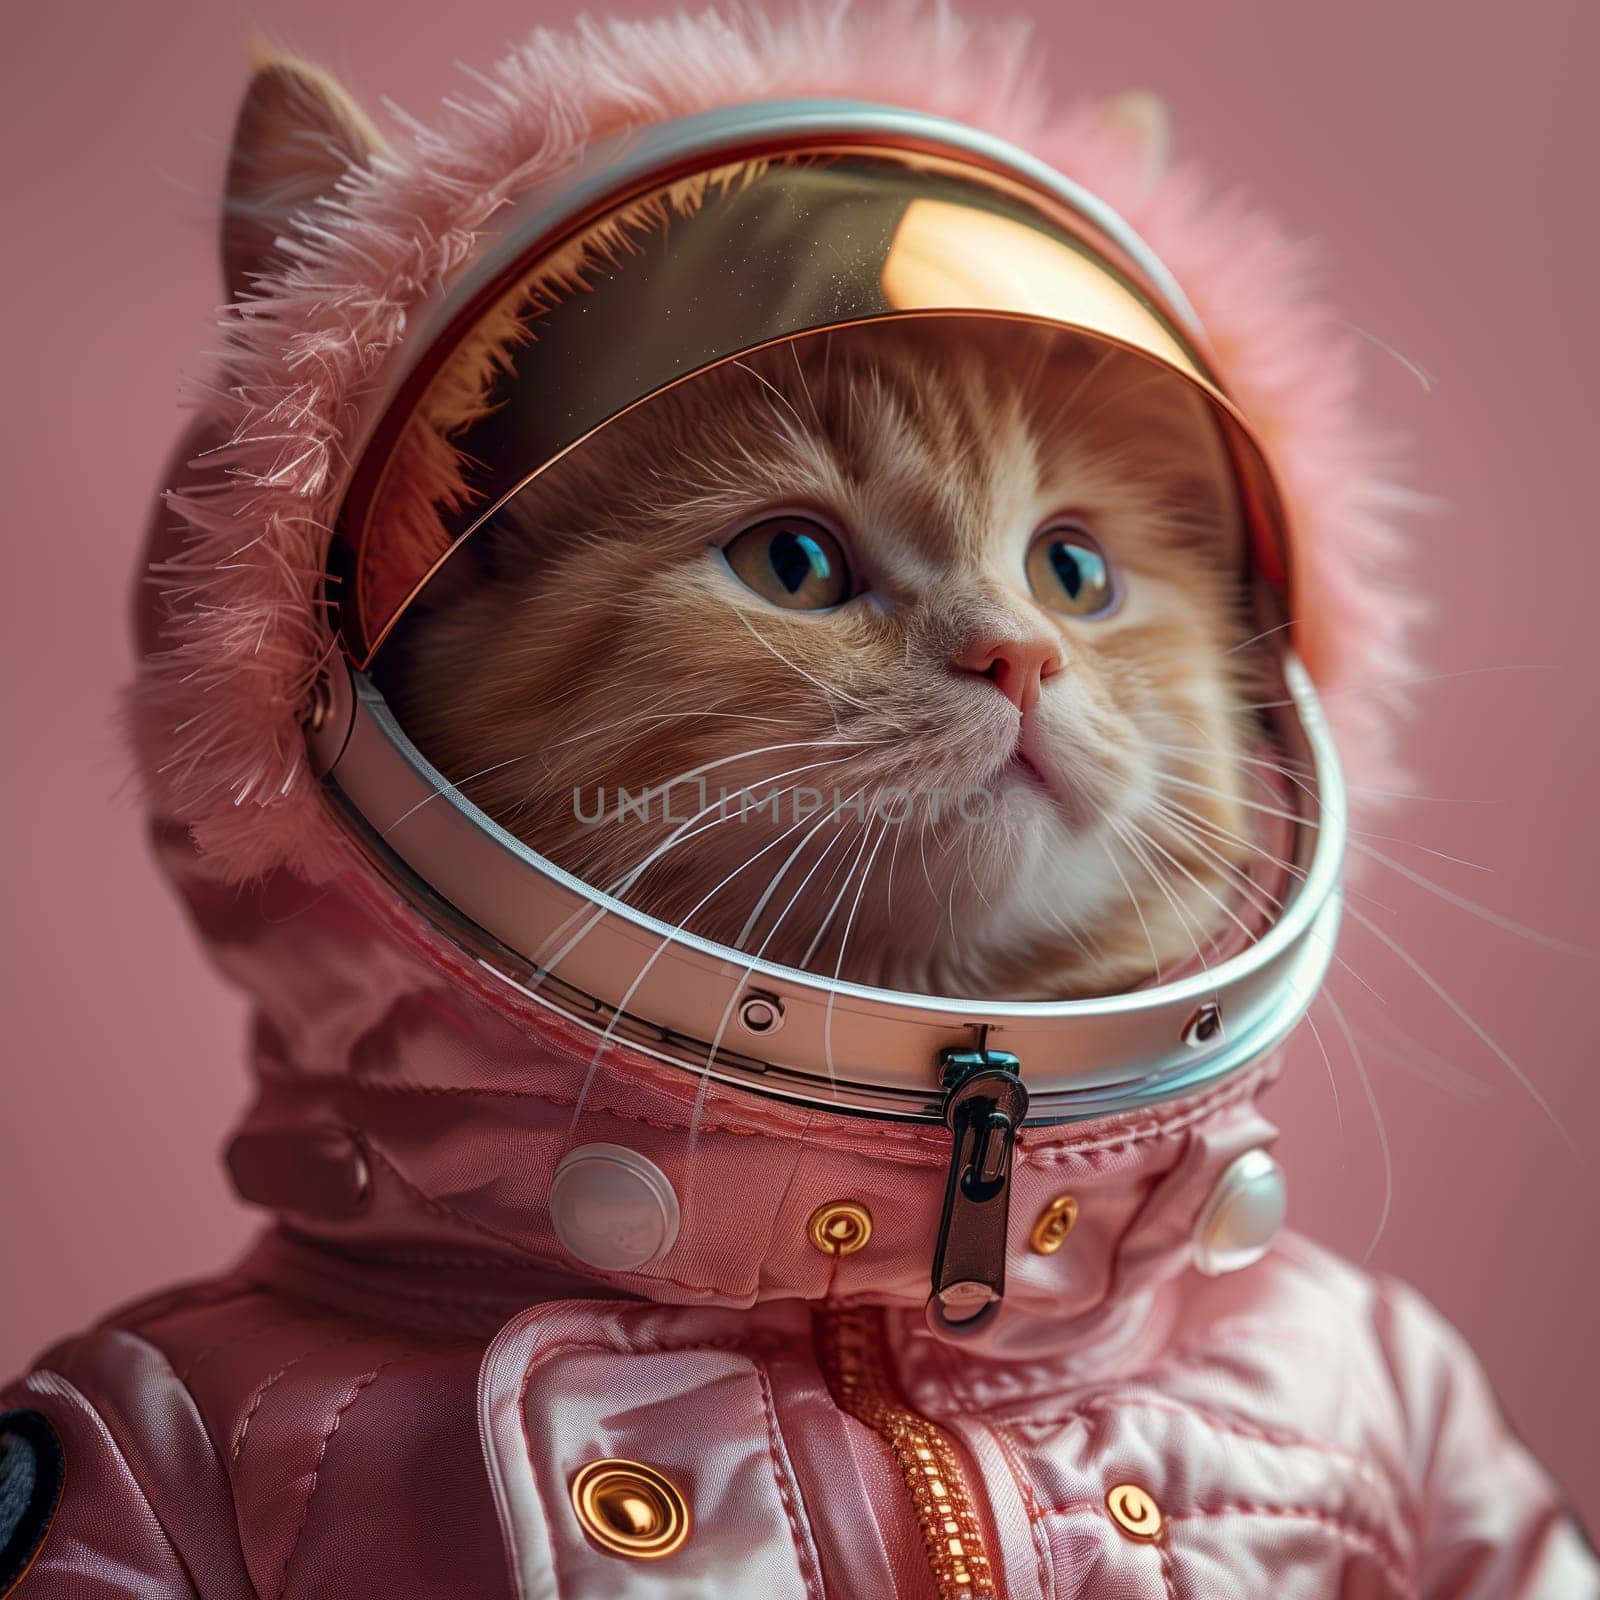 A Felidae member dressed in a pink space suit and helmet, showcasing its whiskers and fur. The collar serves as a stylish fashion accessory for this small to mediumsized carnivore